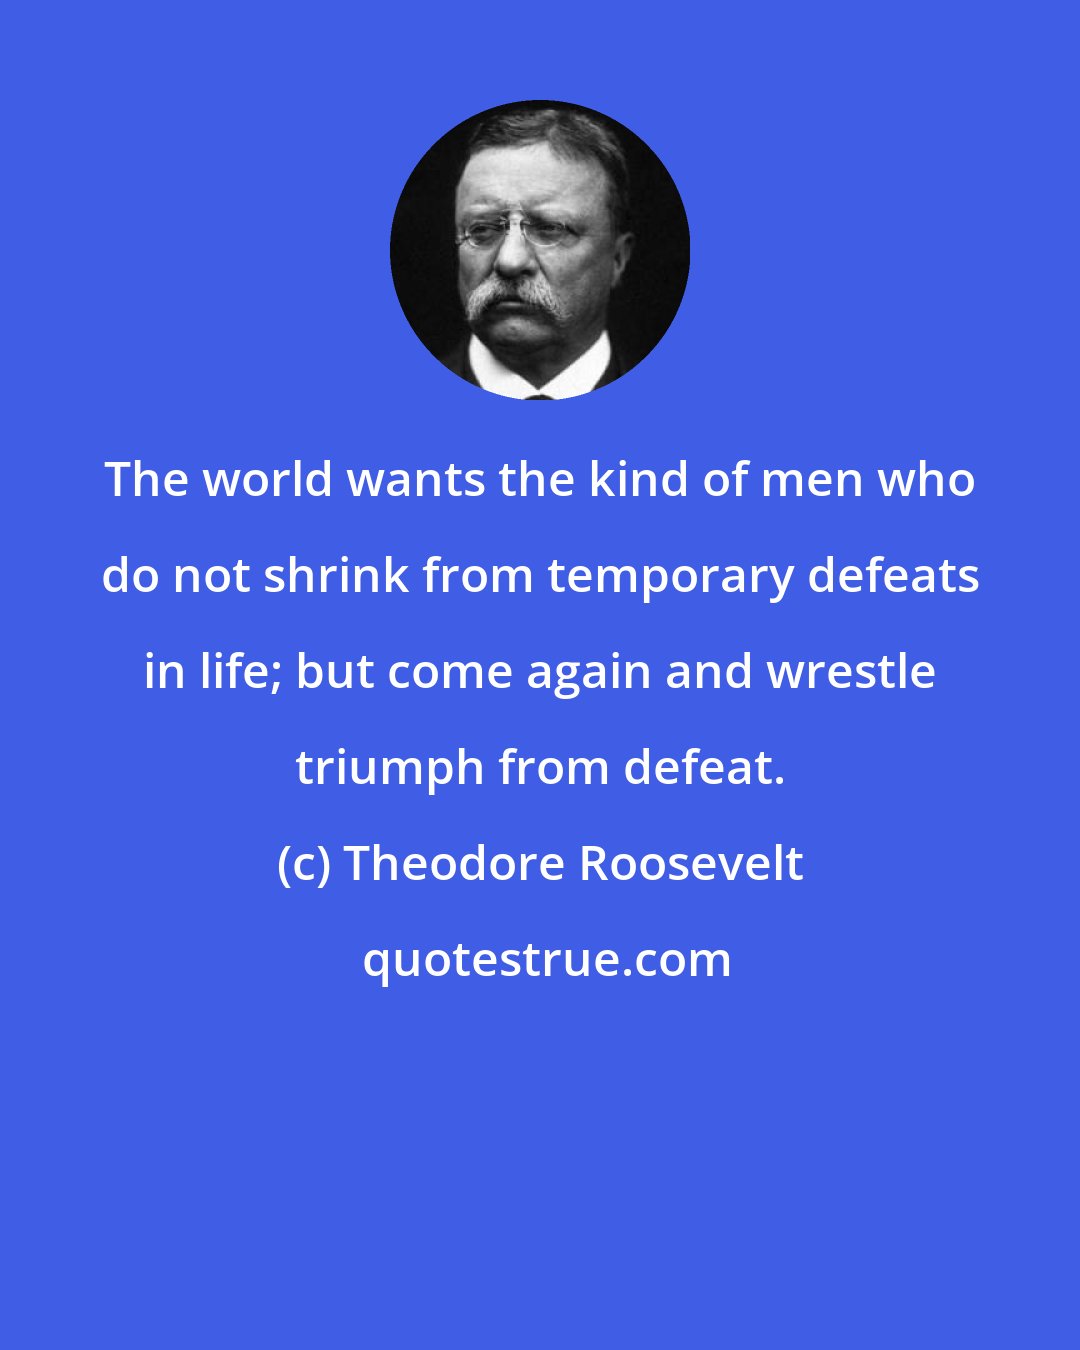 Theodore Roosevelt: The world wants the kind of men who do not shrink from temporary defeats in life; but come again and wrestle triumph from defeat.